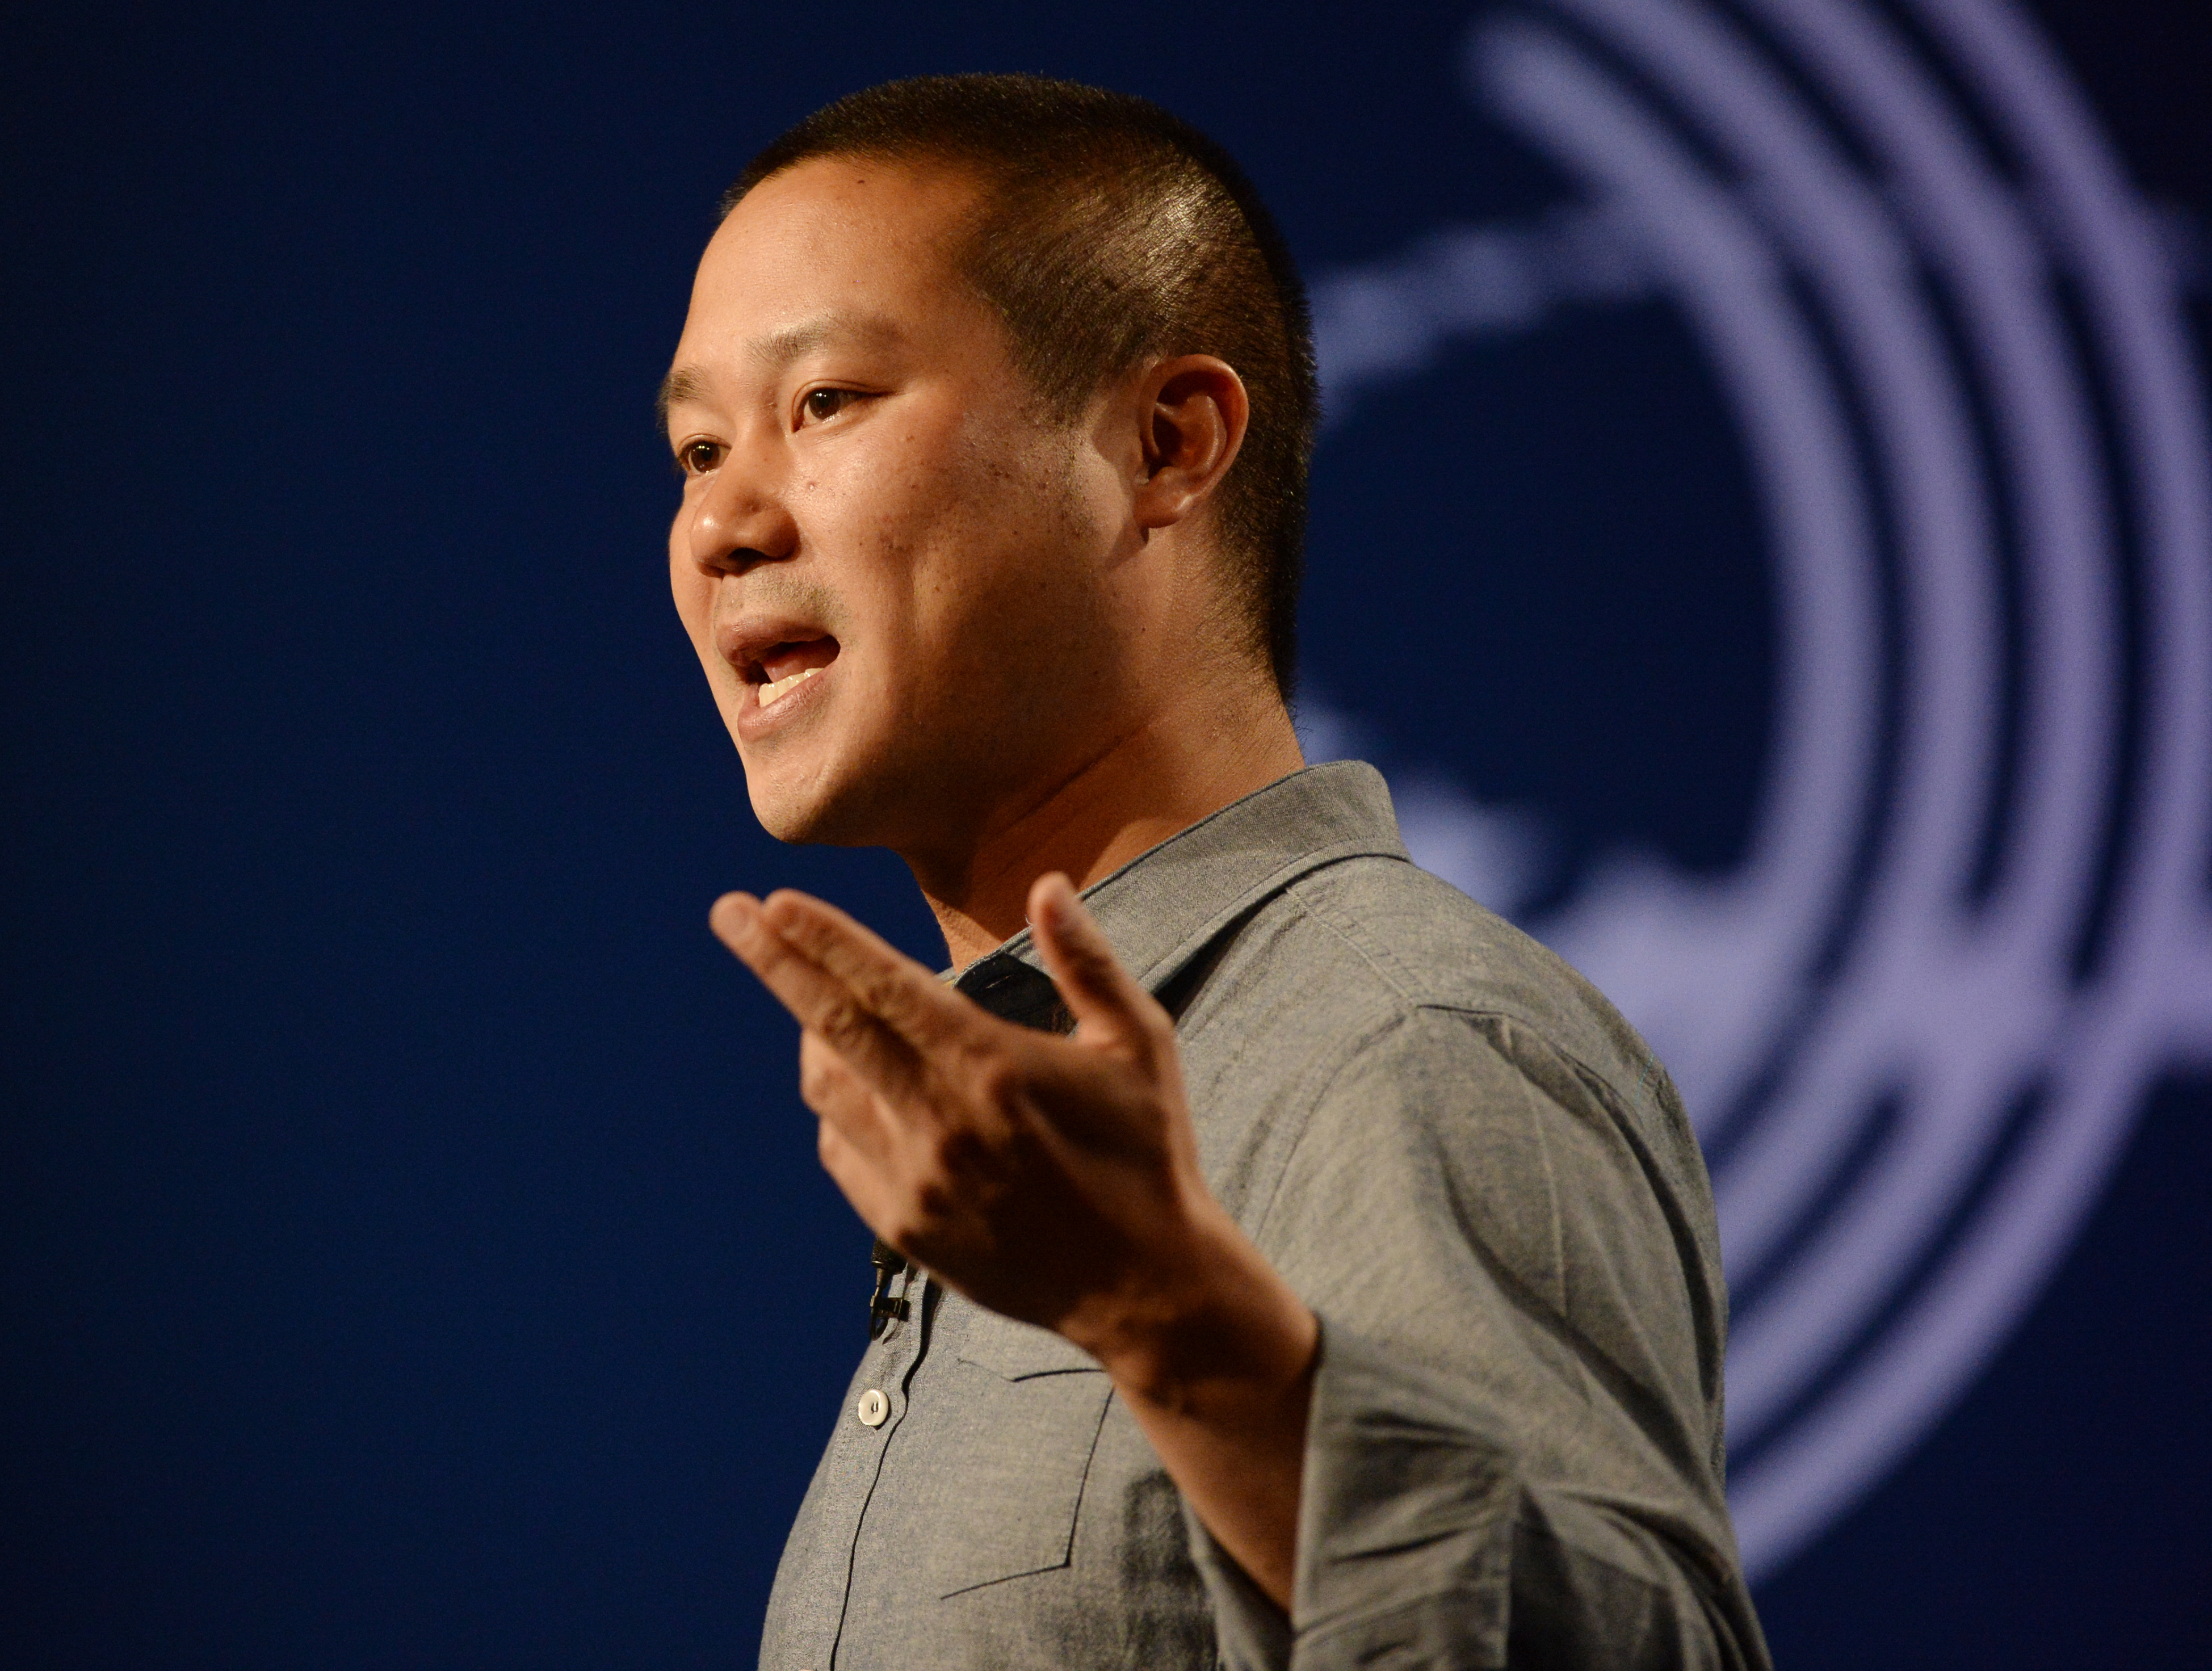 Zappos CEO Tony Hsieh speaks at the Clinton Global Initiative America at the Sheridan, Denver on June 25, 2014. (Andy Cross—Denver Post/Getty Images)